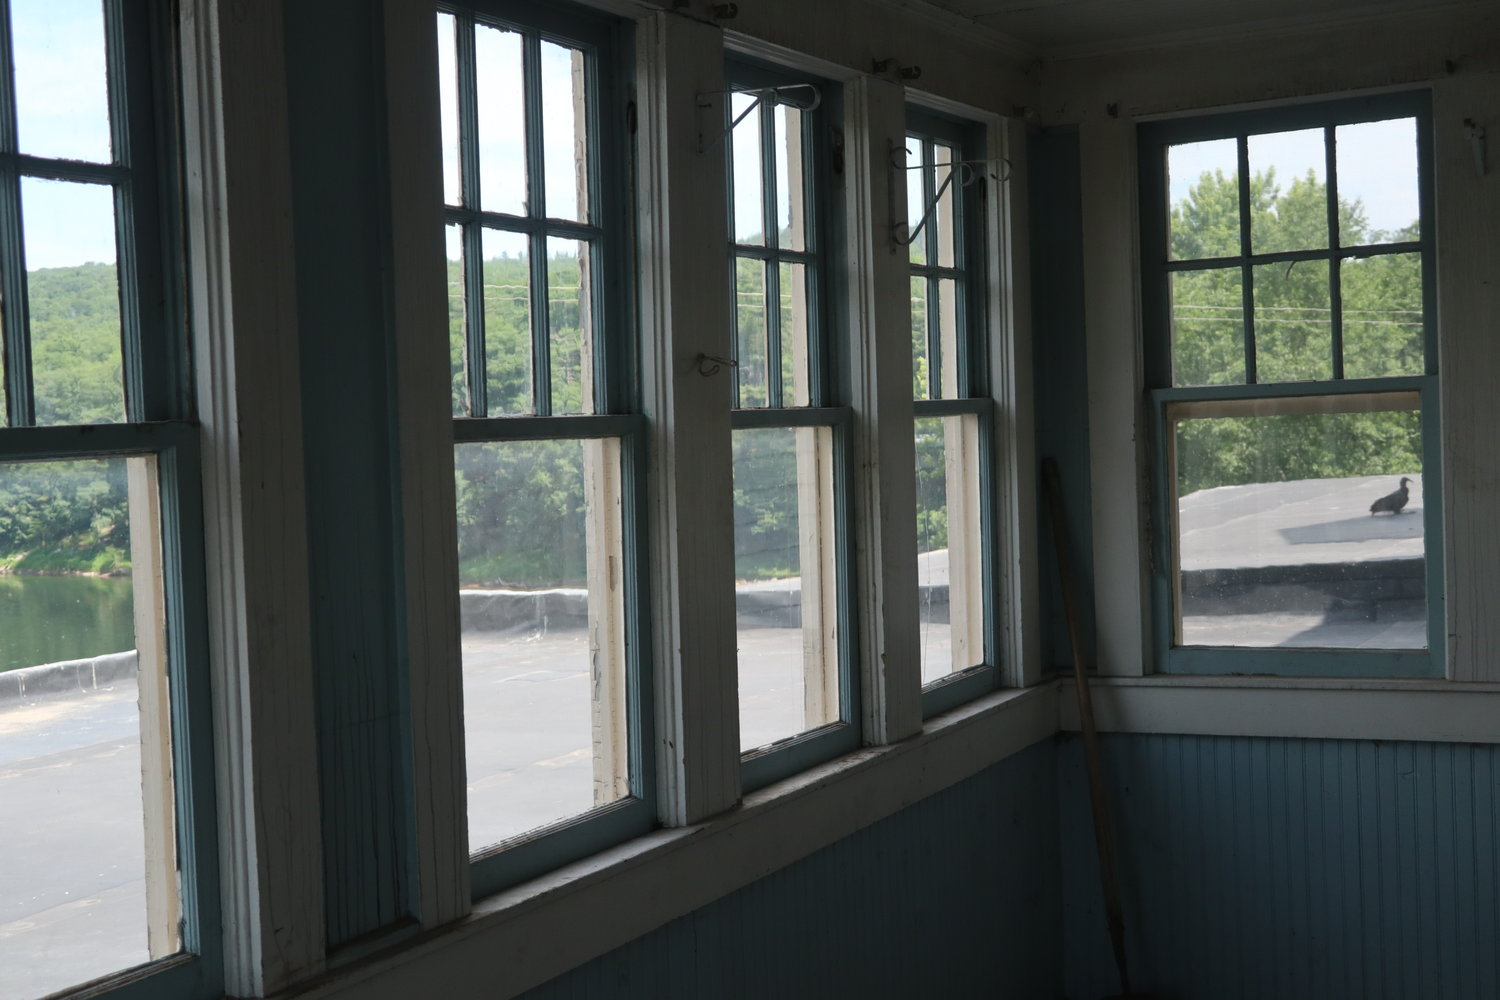 The uppermost floor will be renovated into four apartments. Those facing the Big Eddy have spectacular views.